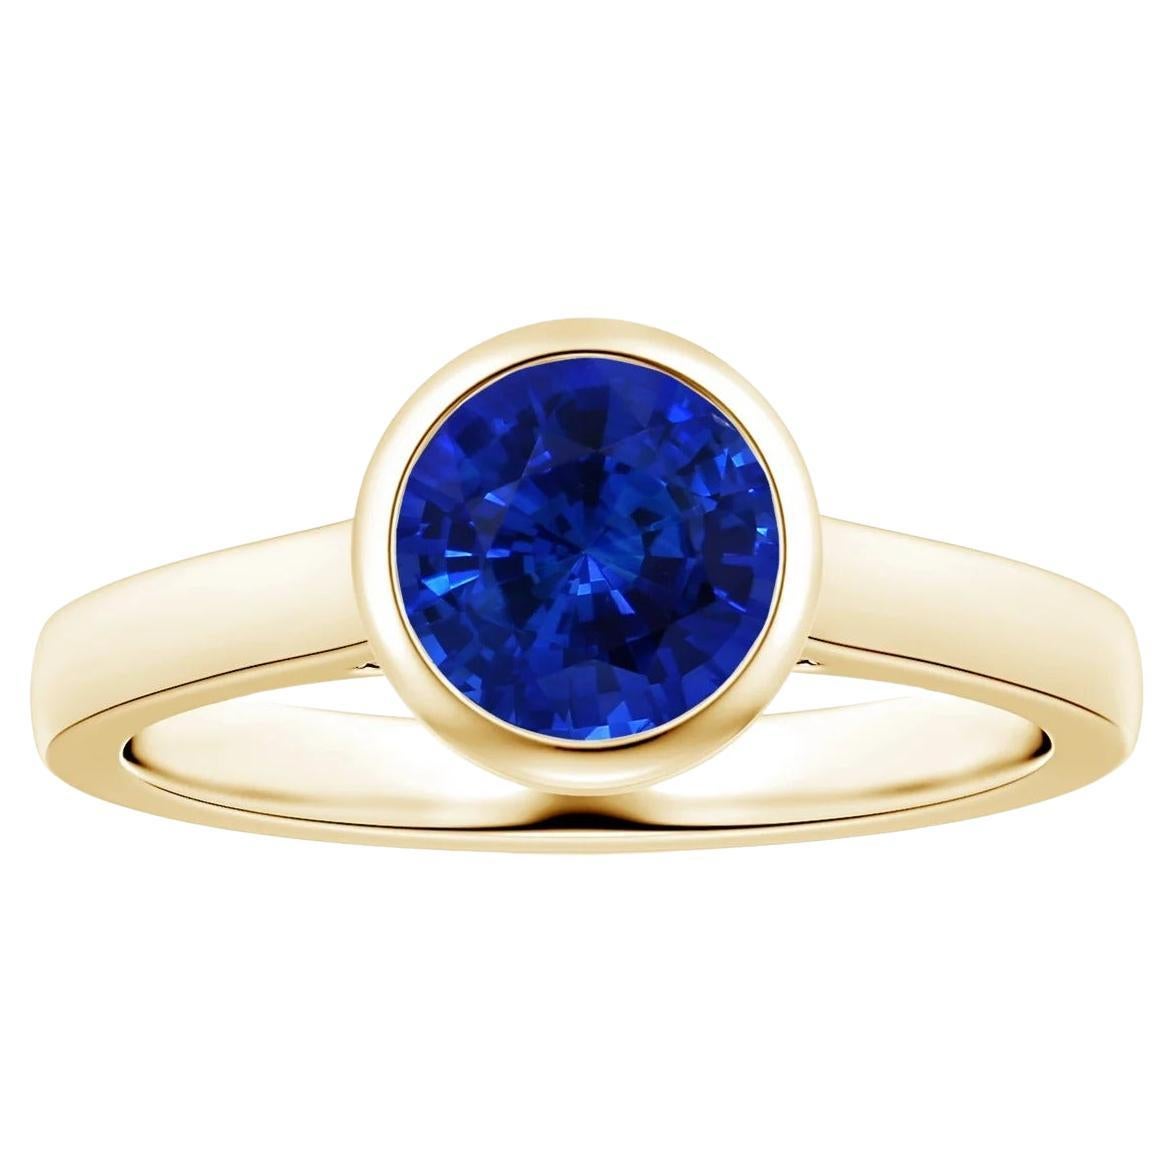 For Sale:  Angara Bezel-Set Gia Certified Round Sapphire Solitaire Ring in Yellow Gold